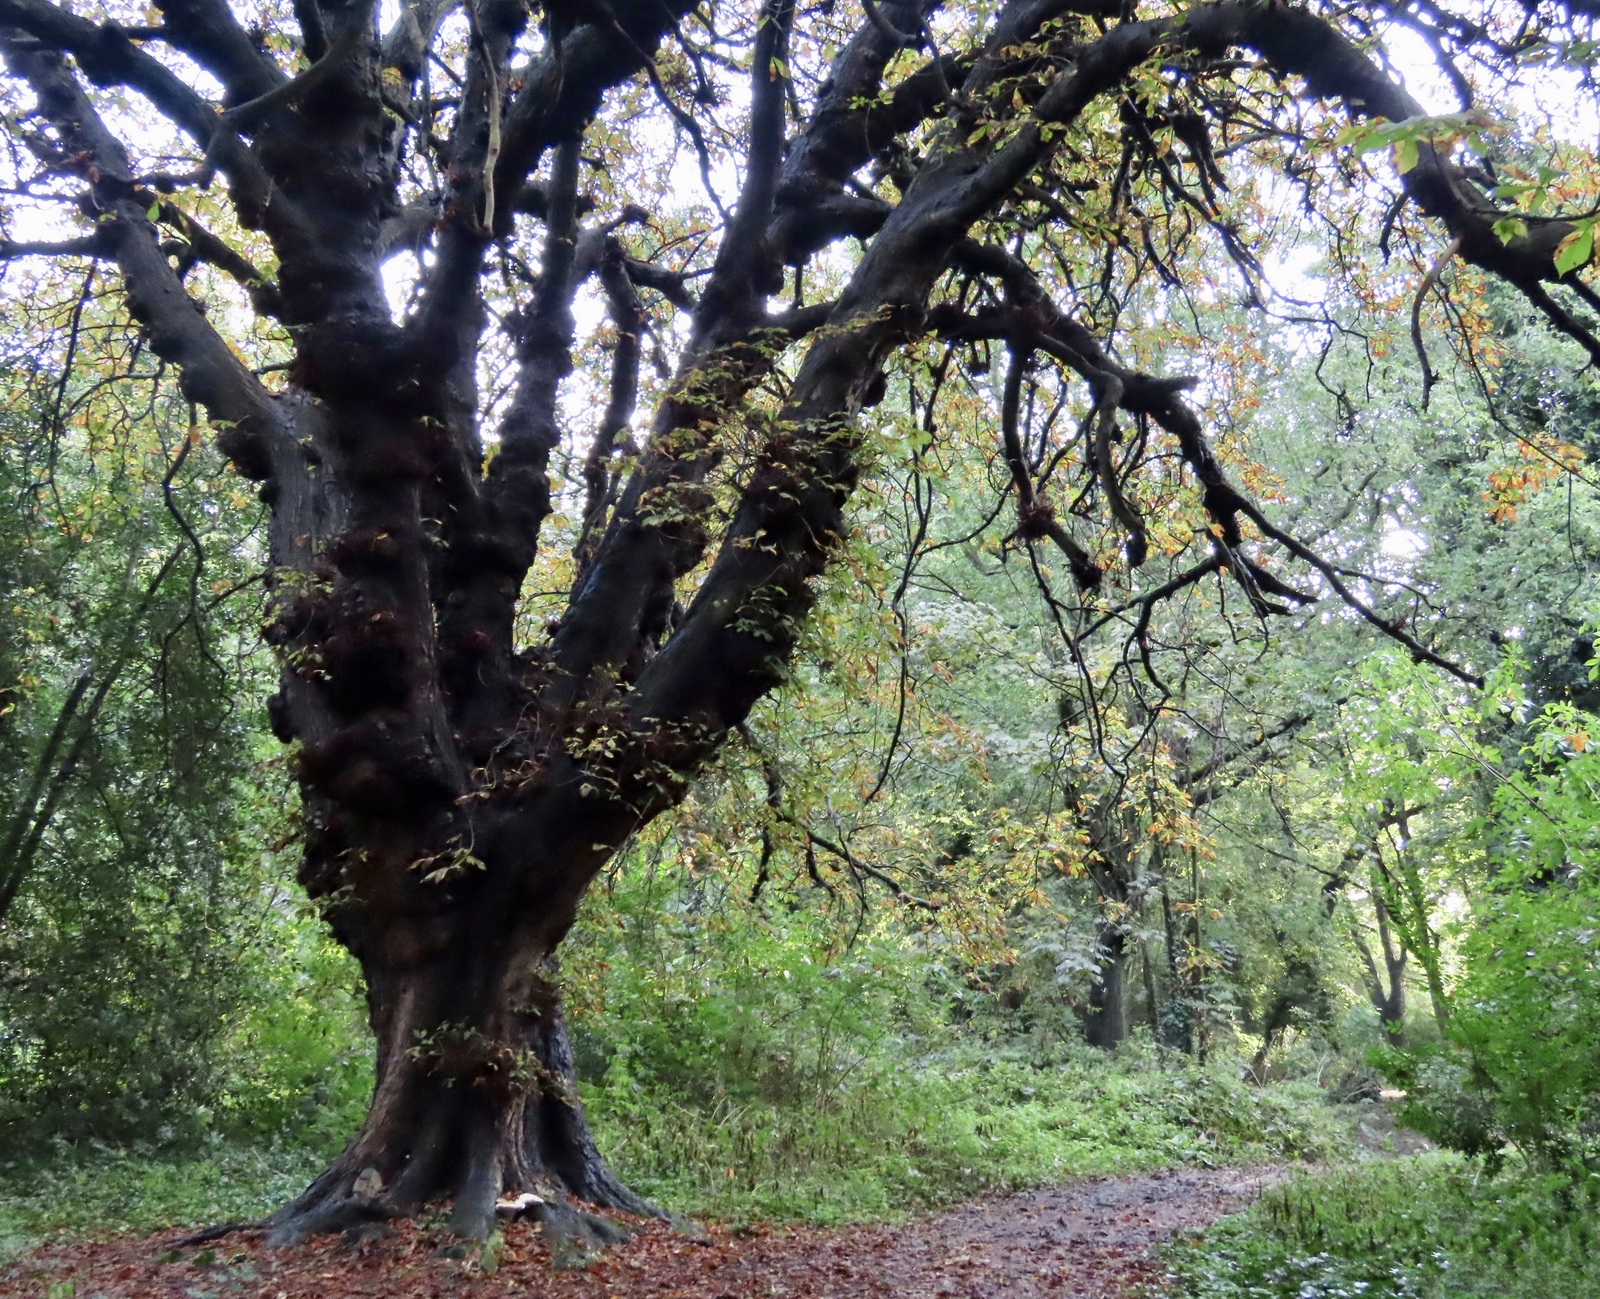 An old Horse Chestnut tree in the cemetery, with bark darkened by heavy rainfall